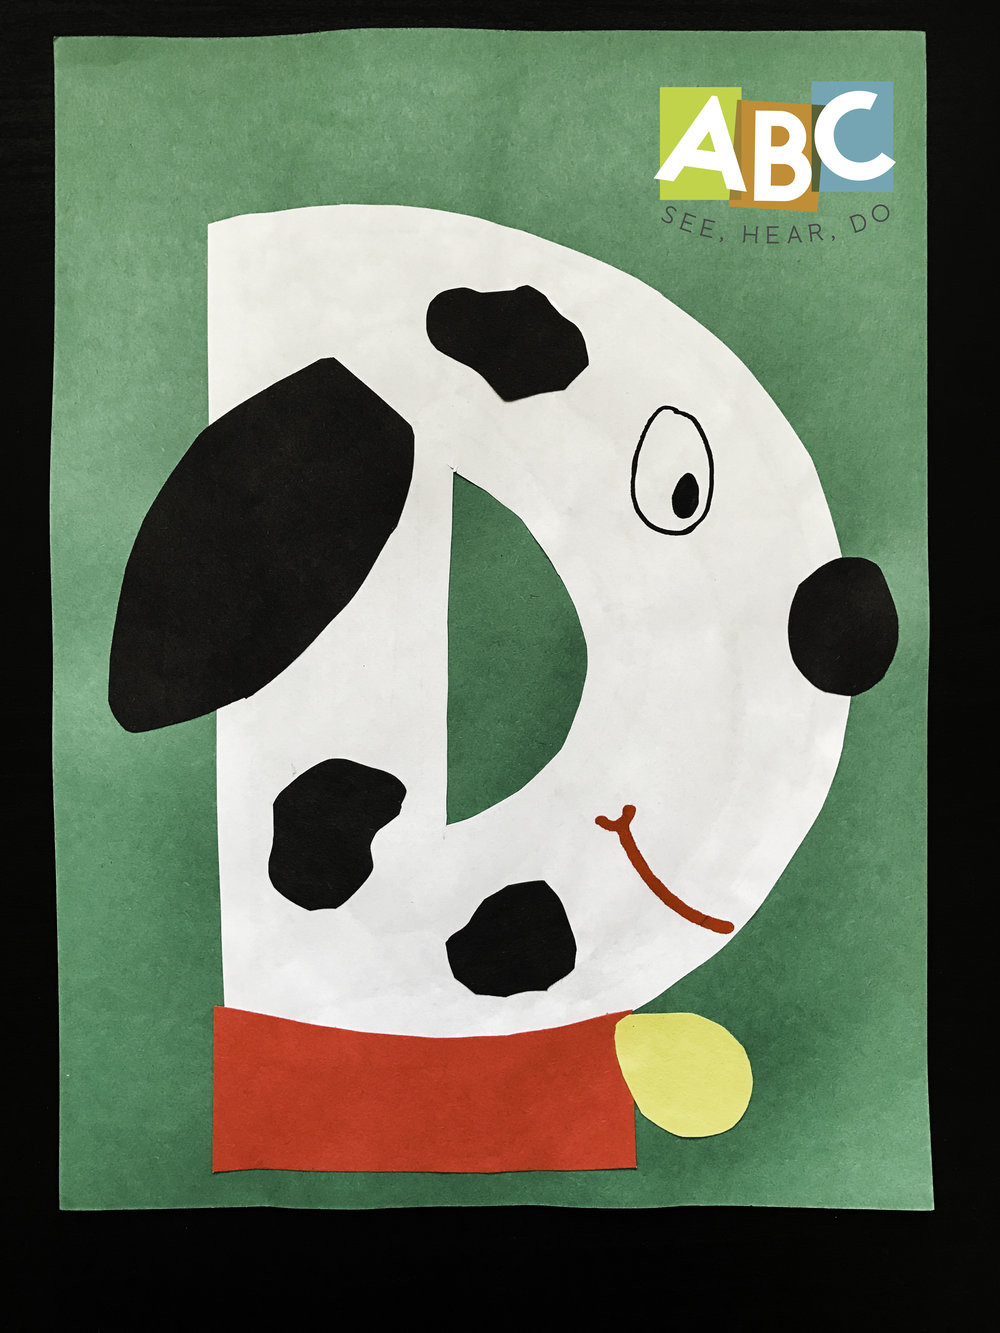 D Crafts For Preschoolers
 Letter D Crafts and Activities — ABC See Hear Do